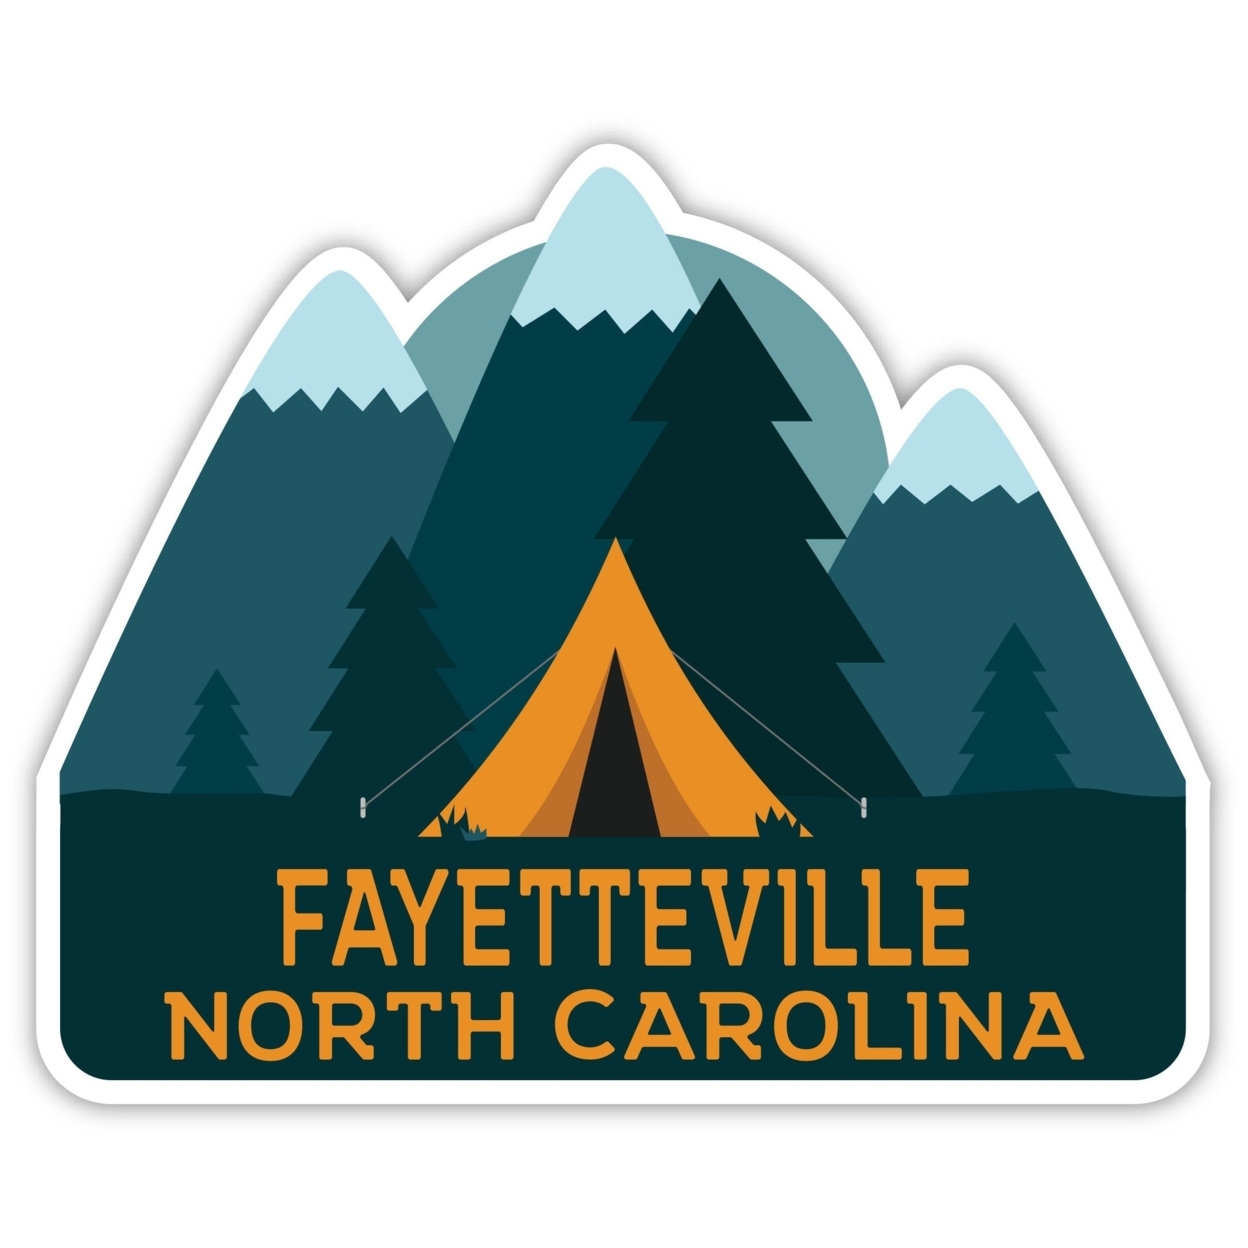 Fayetteville North Carolina Souvenir Decorative Stickers (Choose Theme And Size) - 4-Pack, 6-Inch, Tent